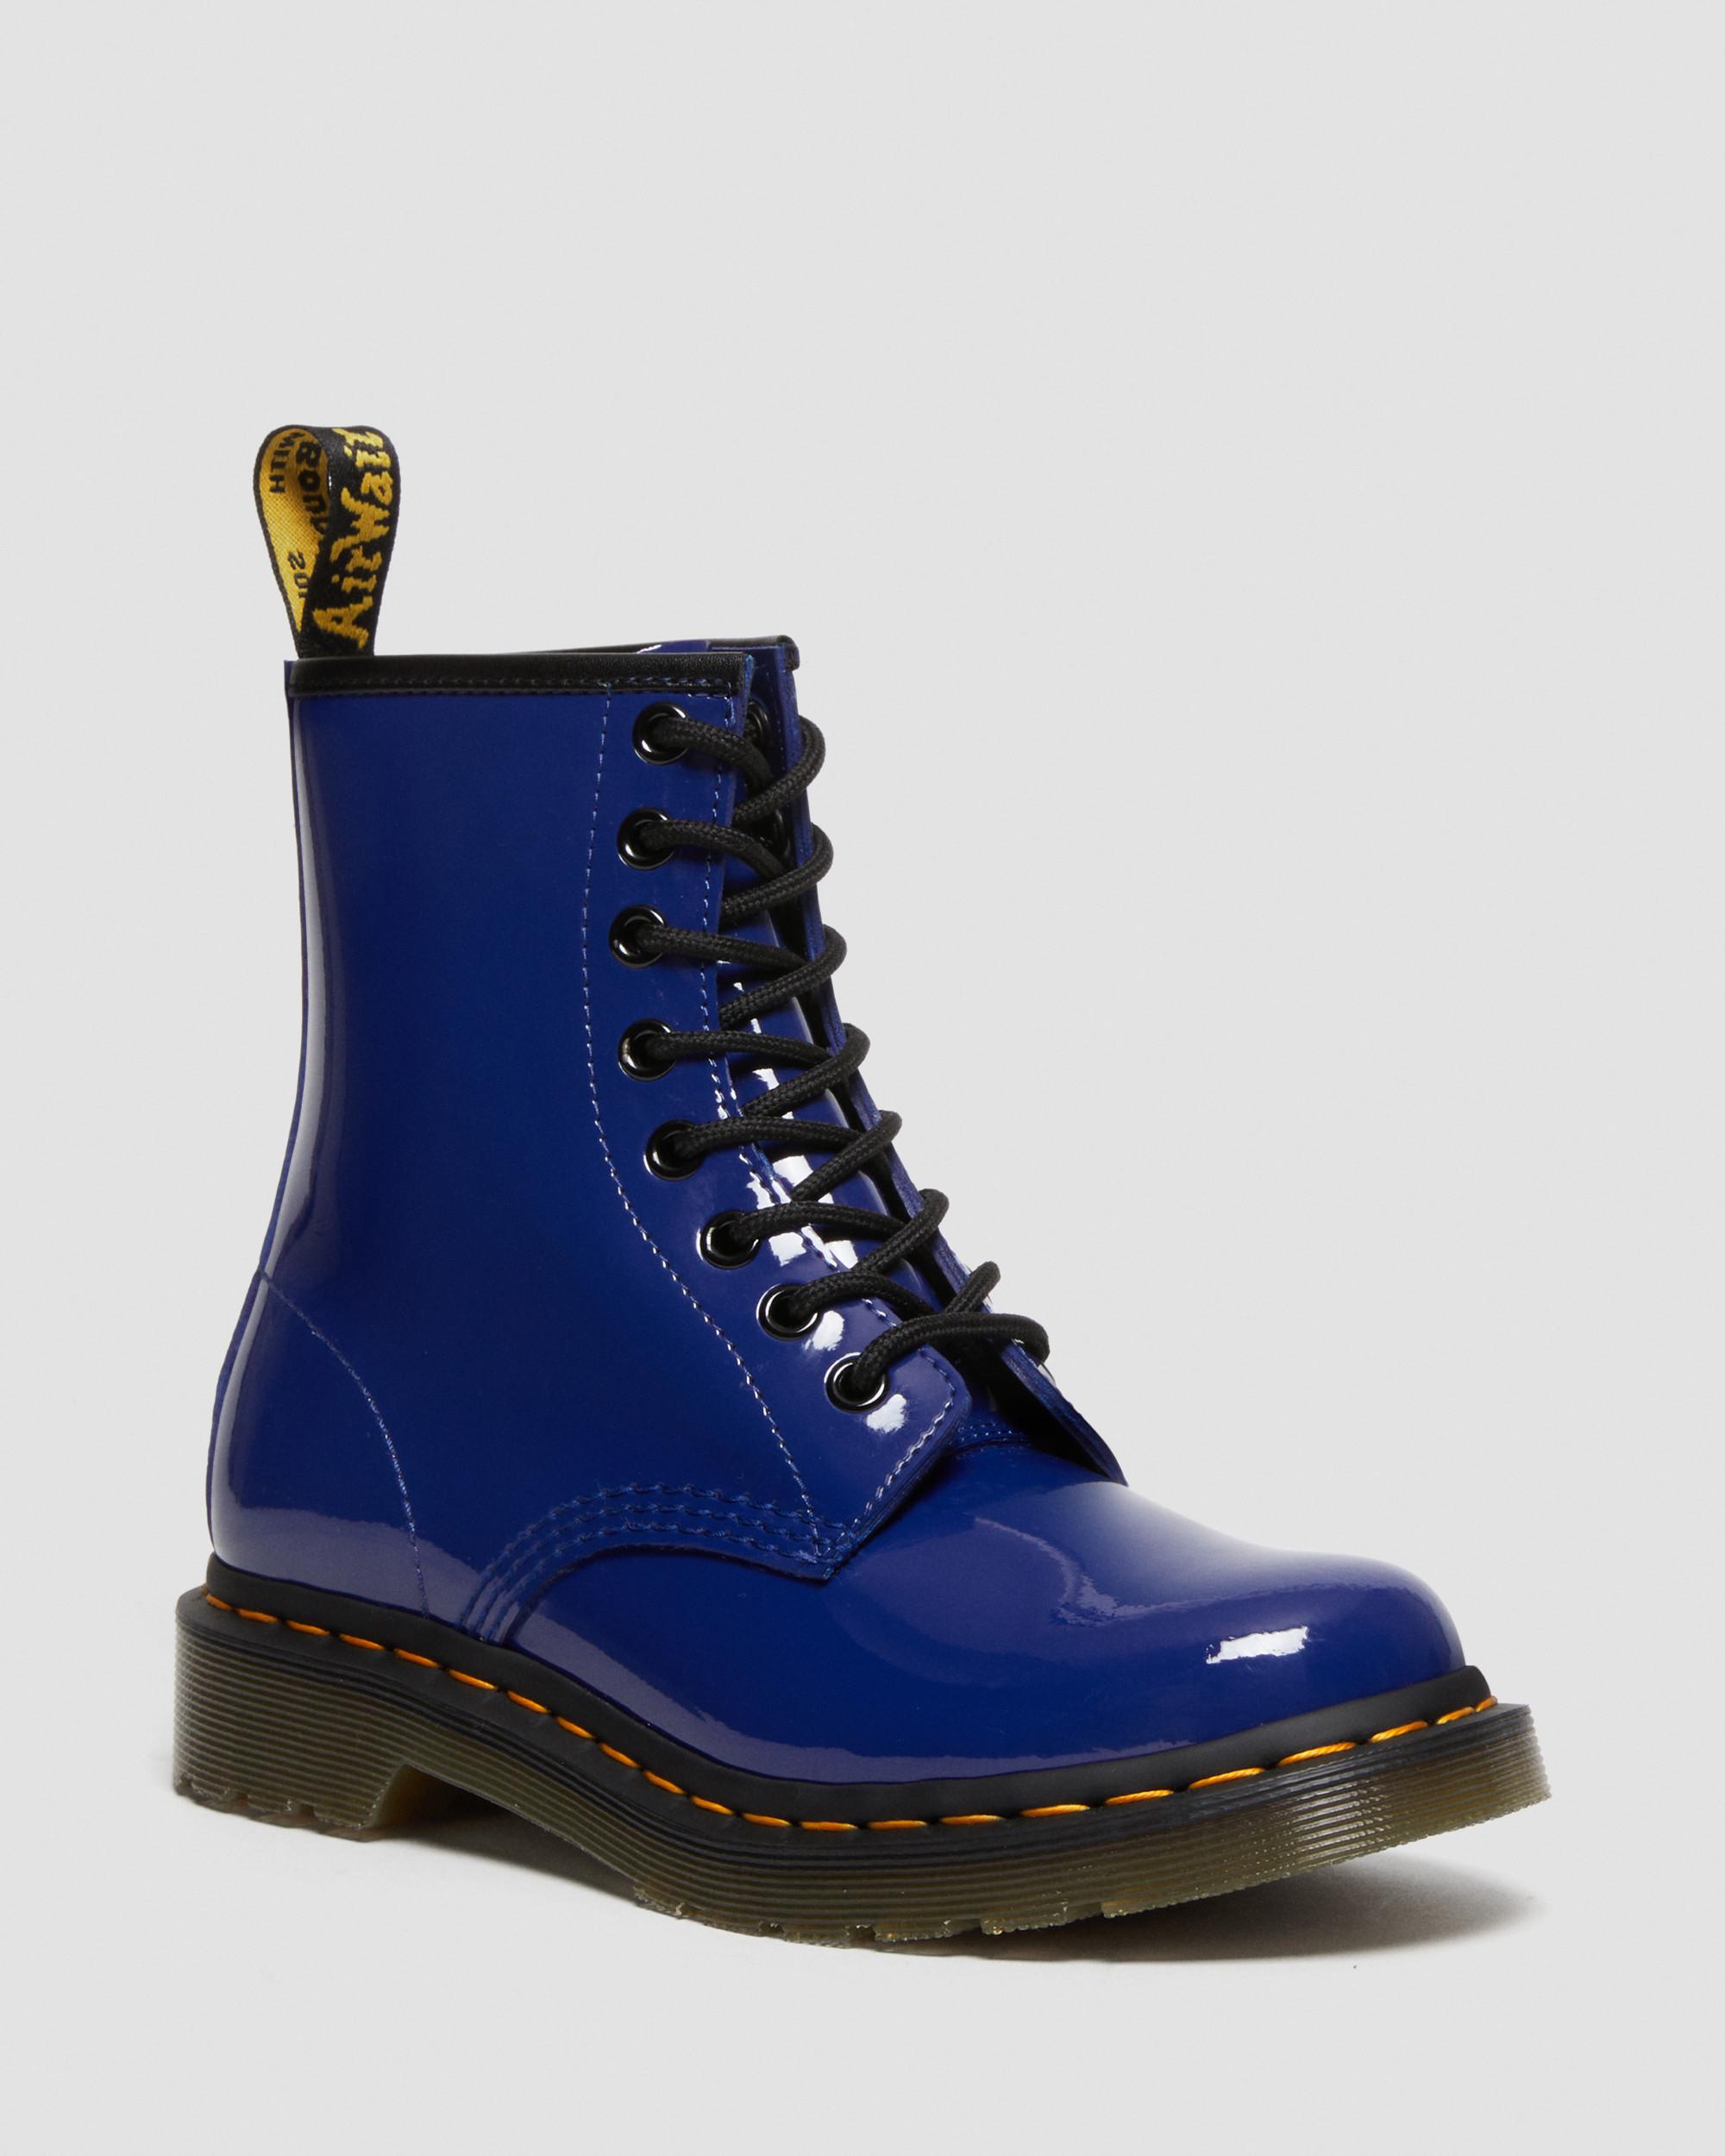 1460 Women's Patent Leather Lace Up Boots in Blue | Dr. Martens